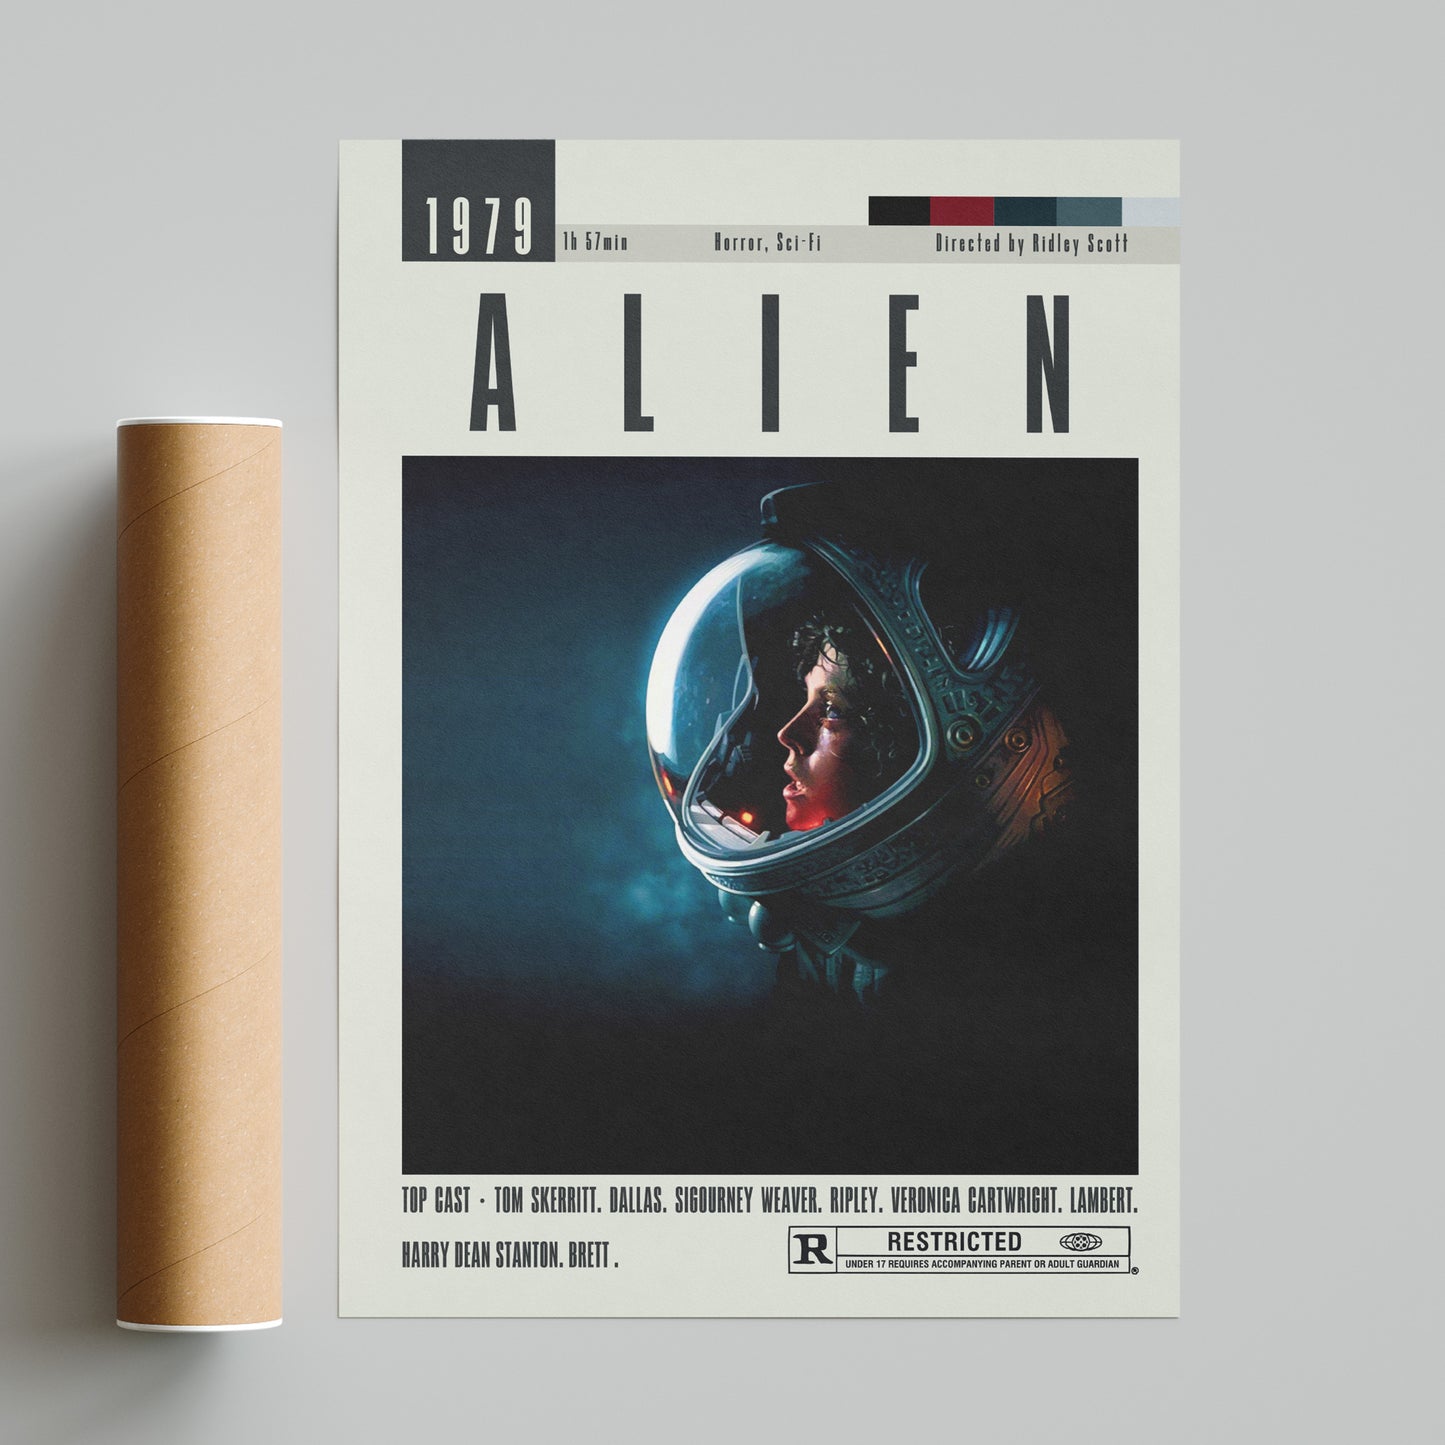 This Alien poster is a must-have for fans of Ridley Scott movies. Featuring the iconic extraterrestrial creature, it's a perfect addition to any movie lover's collection. With its high-quality design, it's sure to be a conversation starter and showcase your love for the sci-fi genre.